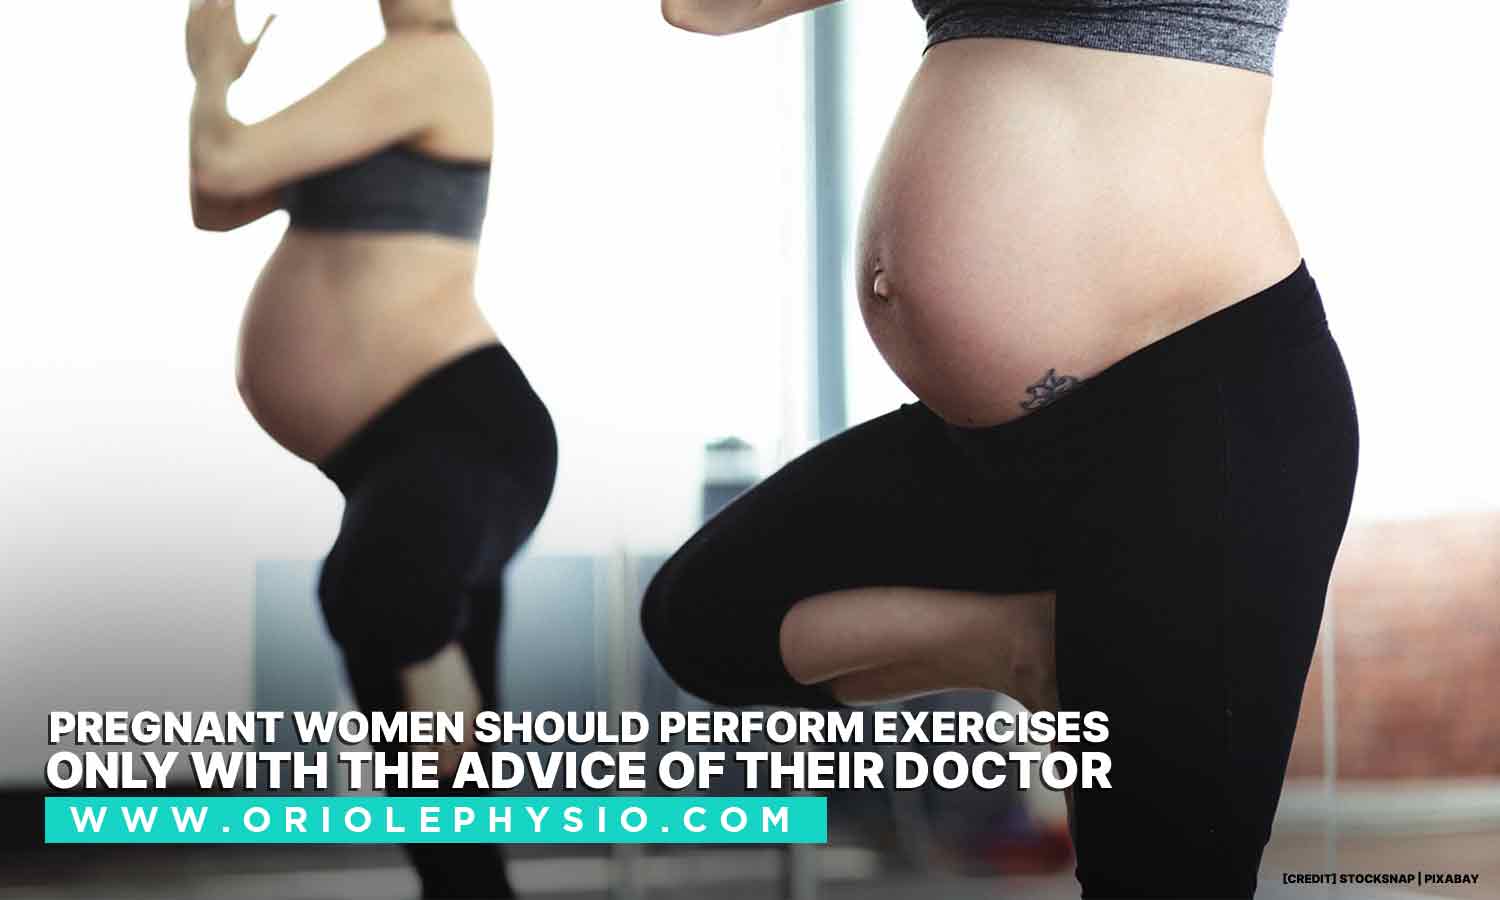 Pregnant women should perform exercises only with the advice of their doctor